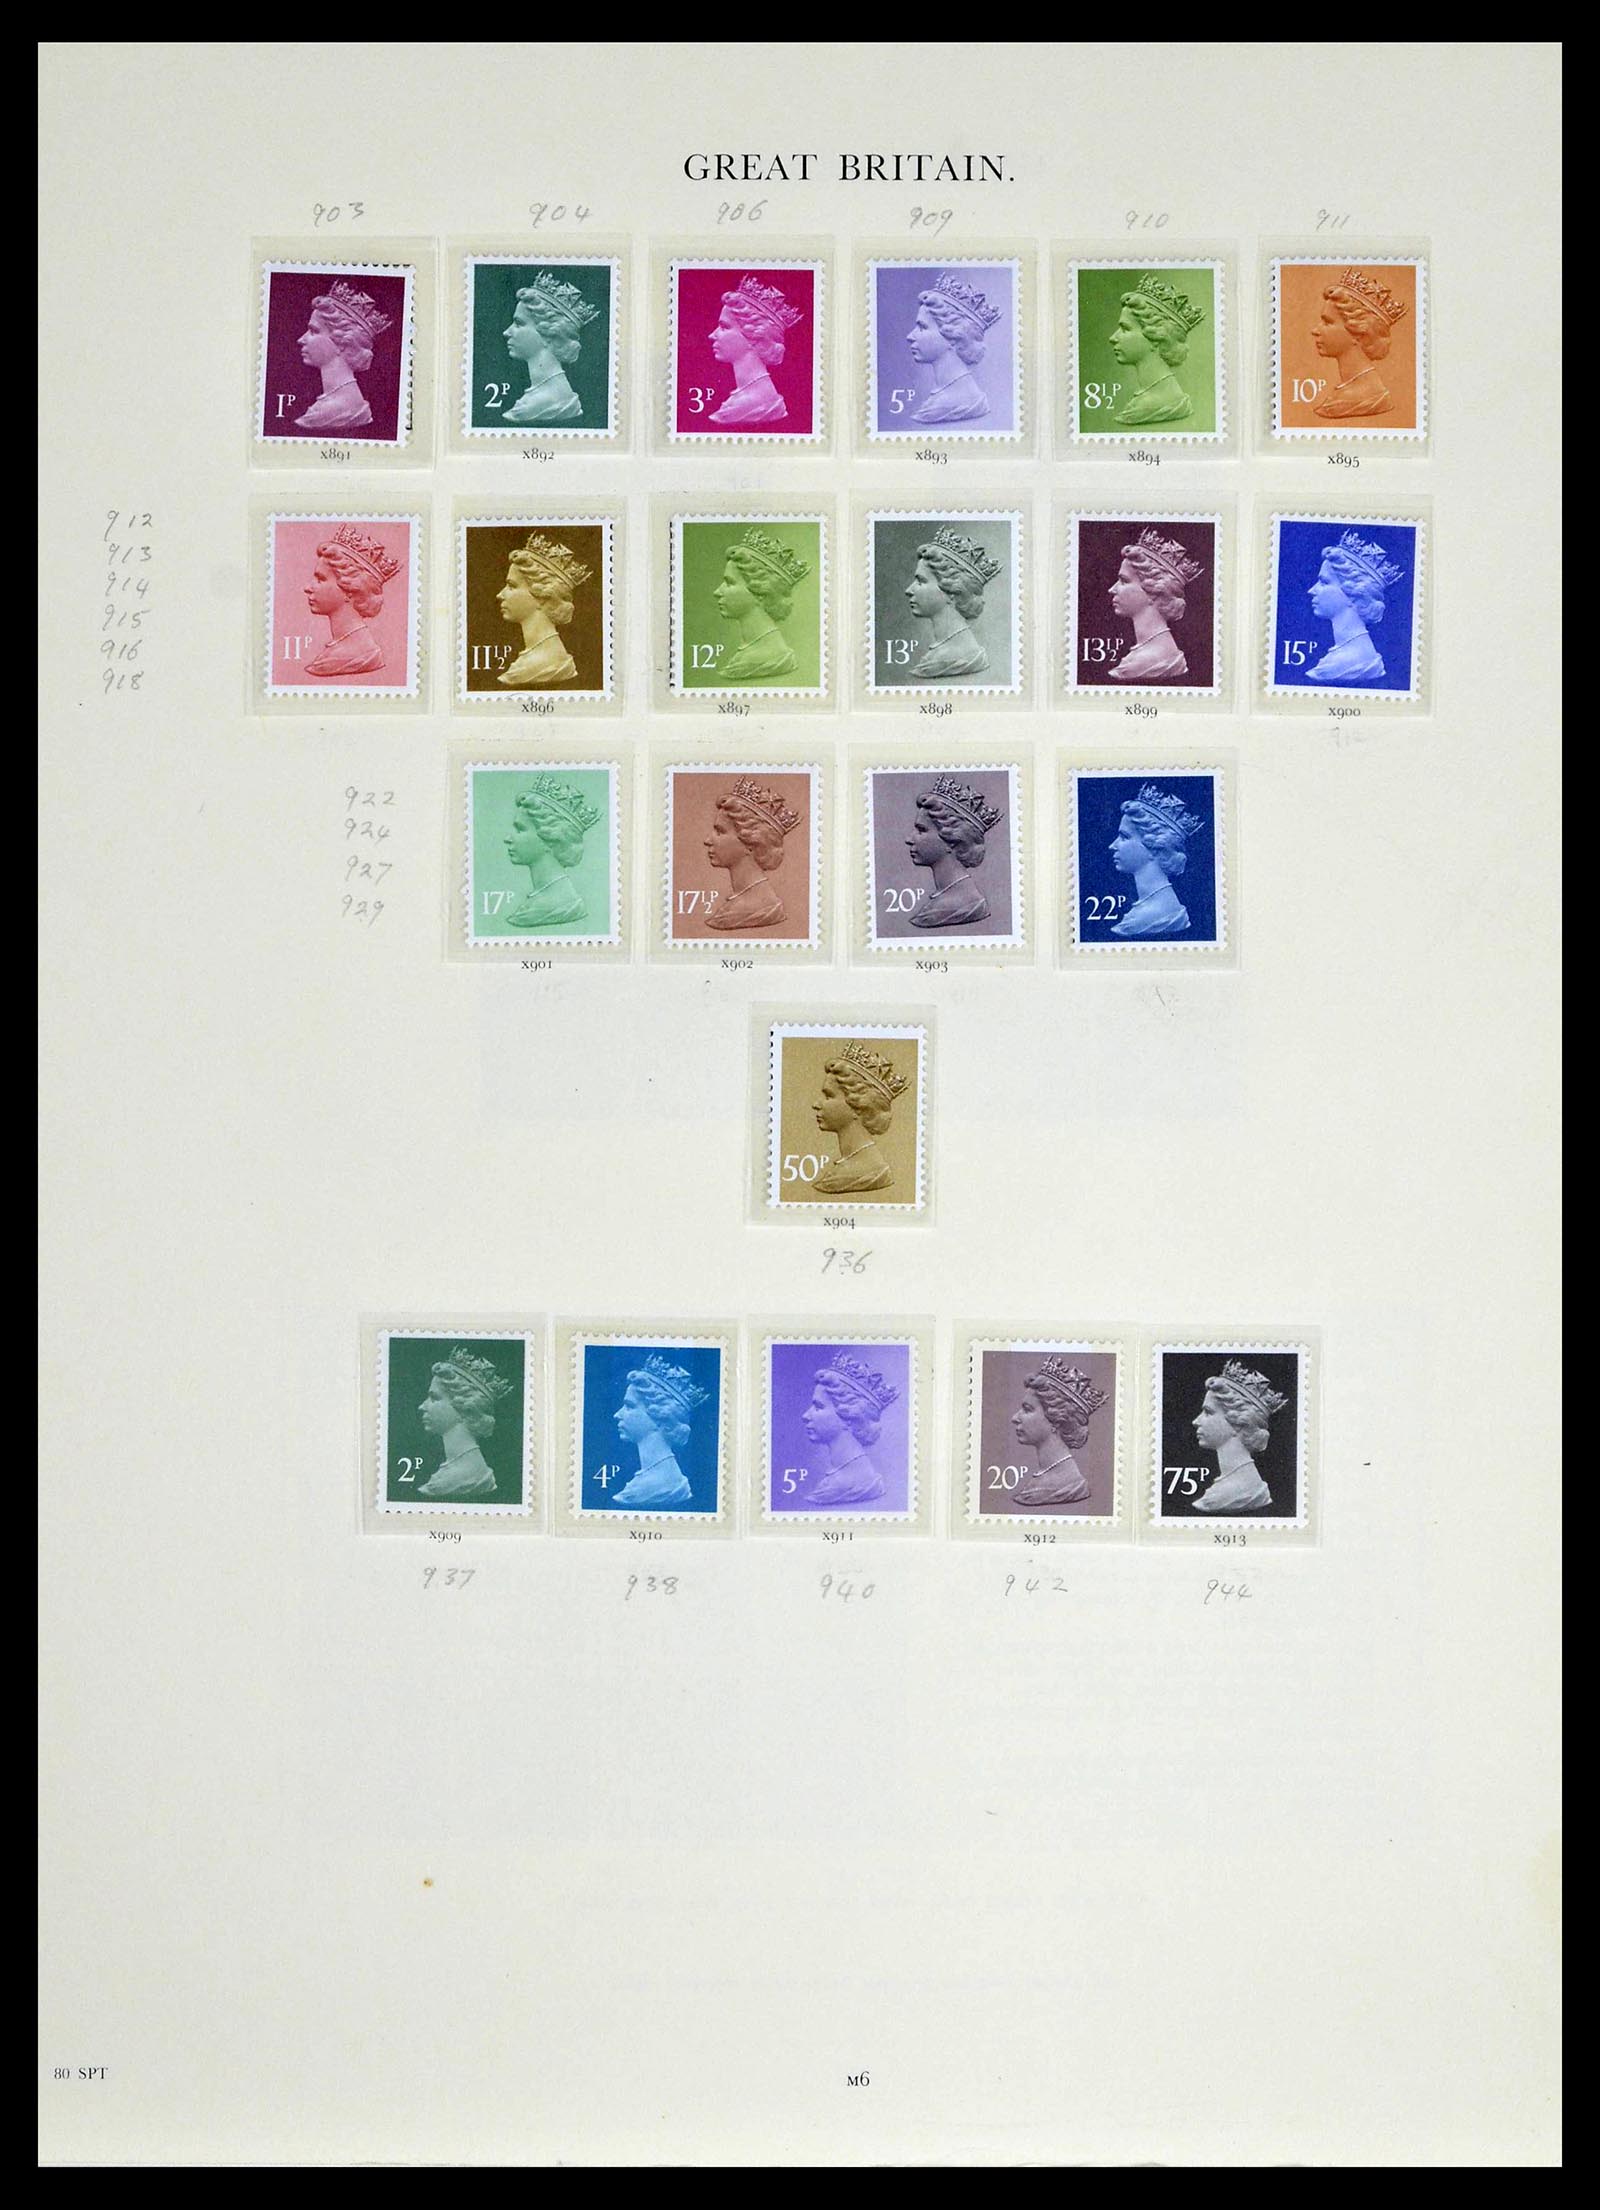 39025 0128 - Stamp collection 39025 Great Britain specialised 1840-1990.